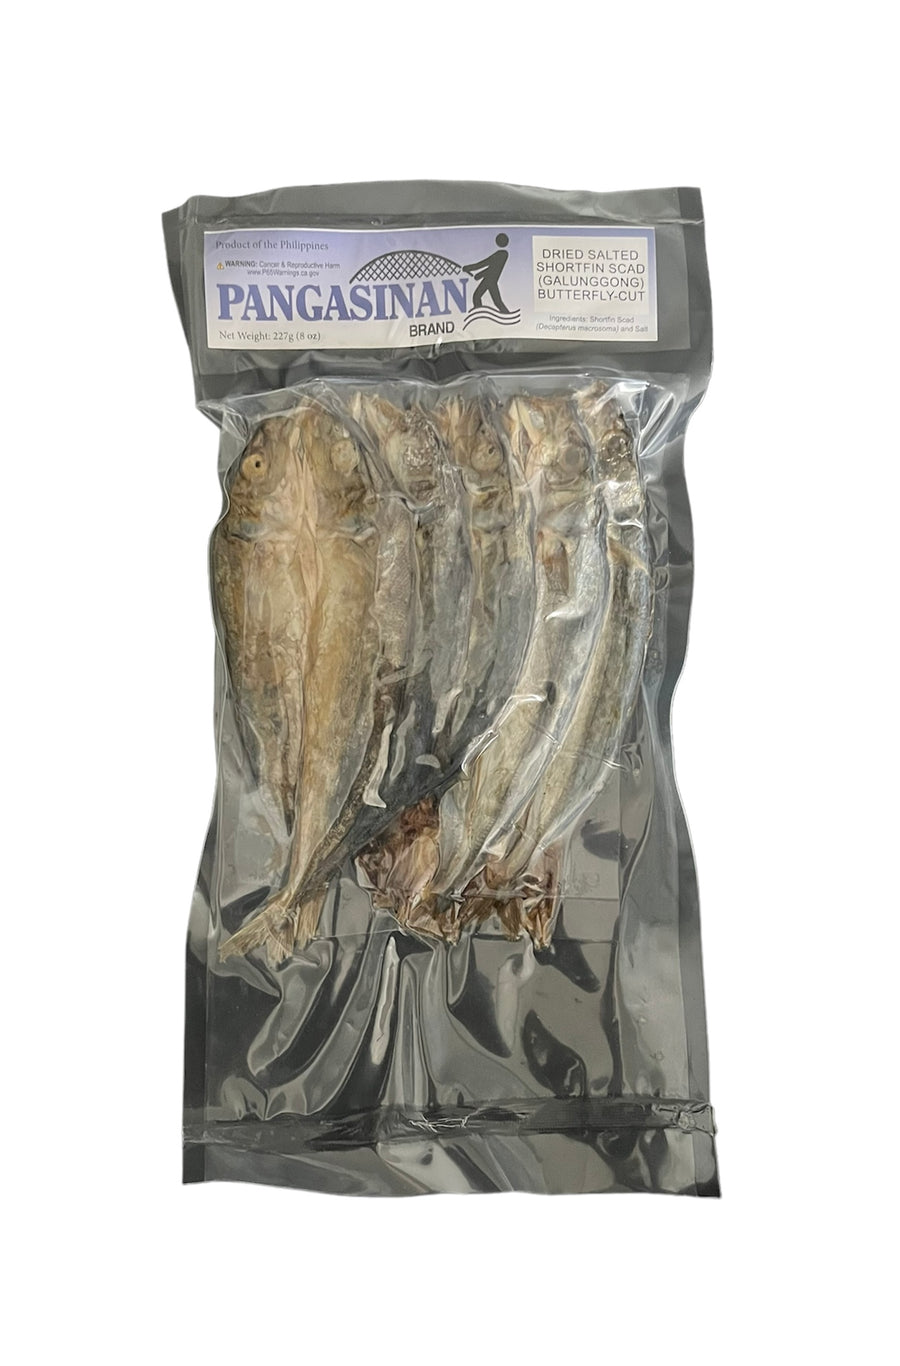 Pangasinan-Dried Salted Mullet-BANAK Butterfly Cut 8 oz – Sophia's